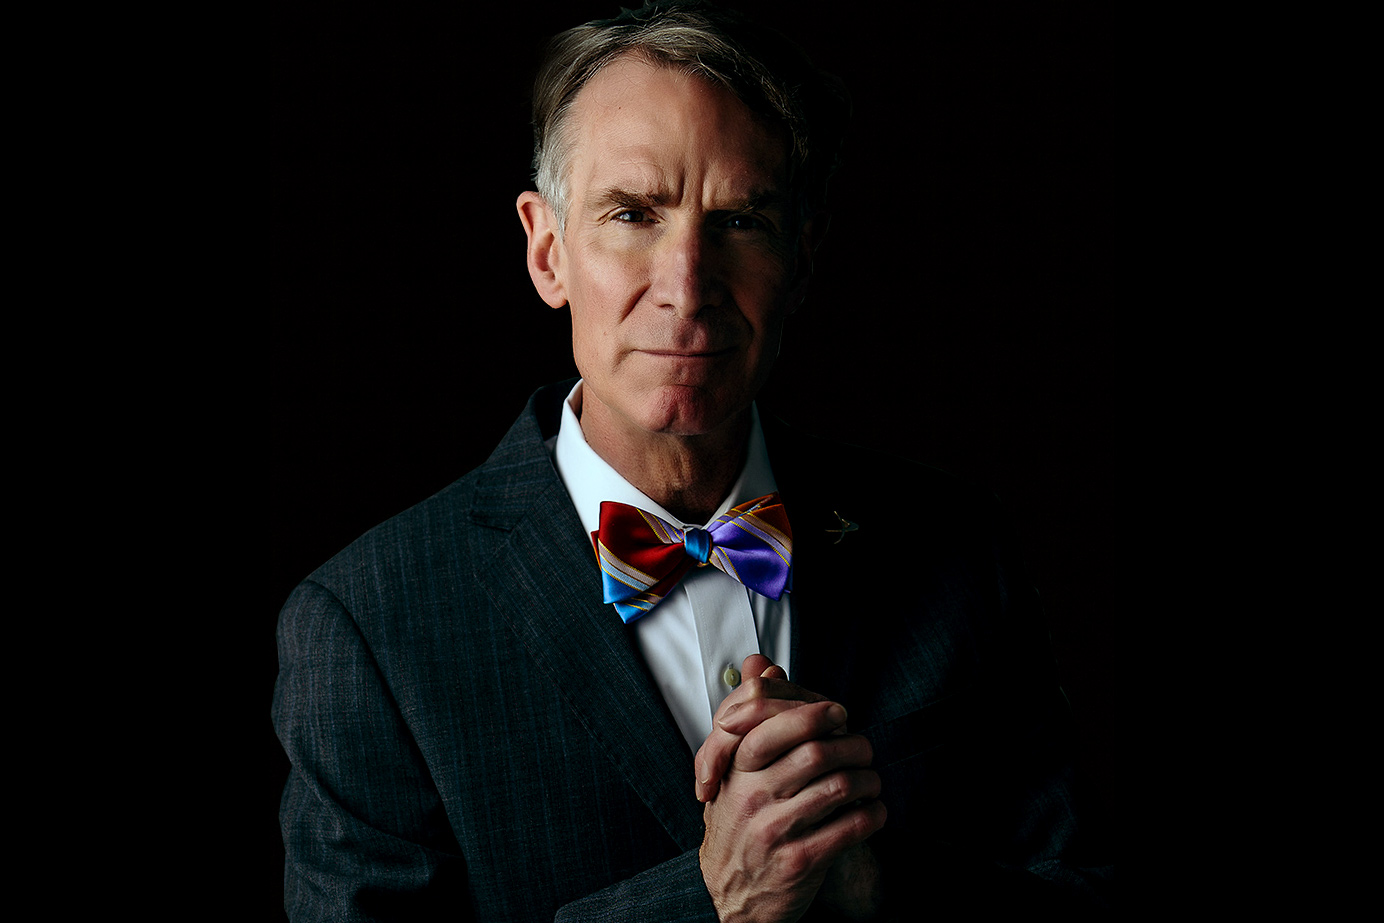 bill-nye-the-science-guy-says-climate-deniers-suffer-psychological-delusions